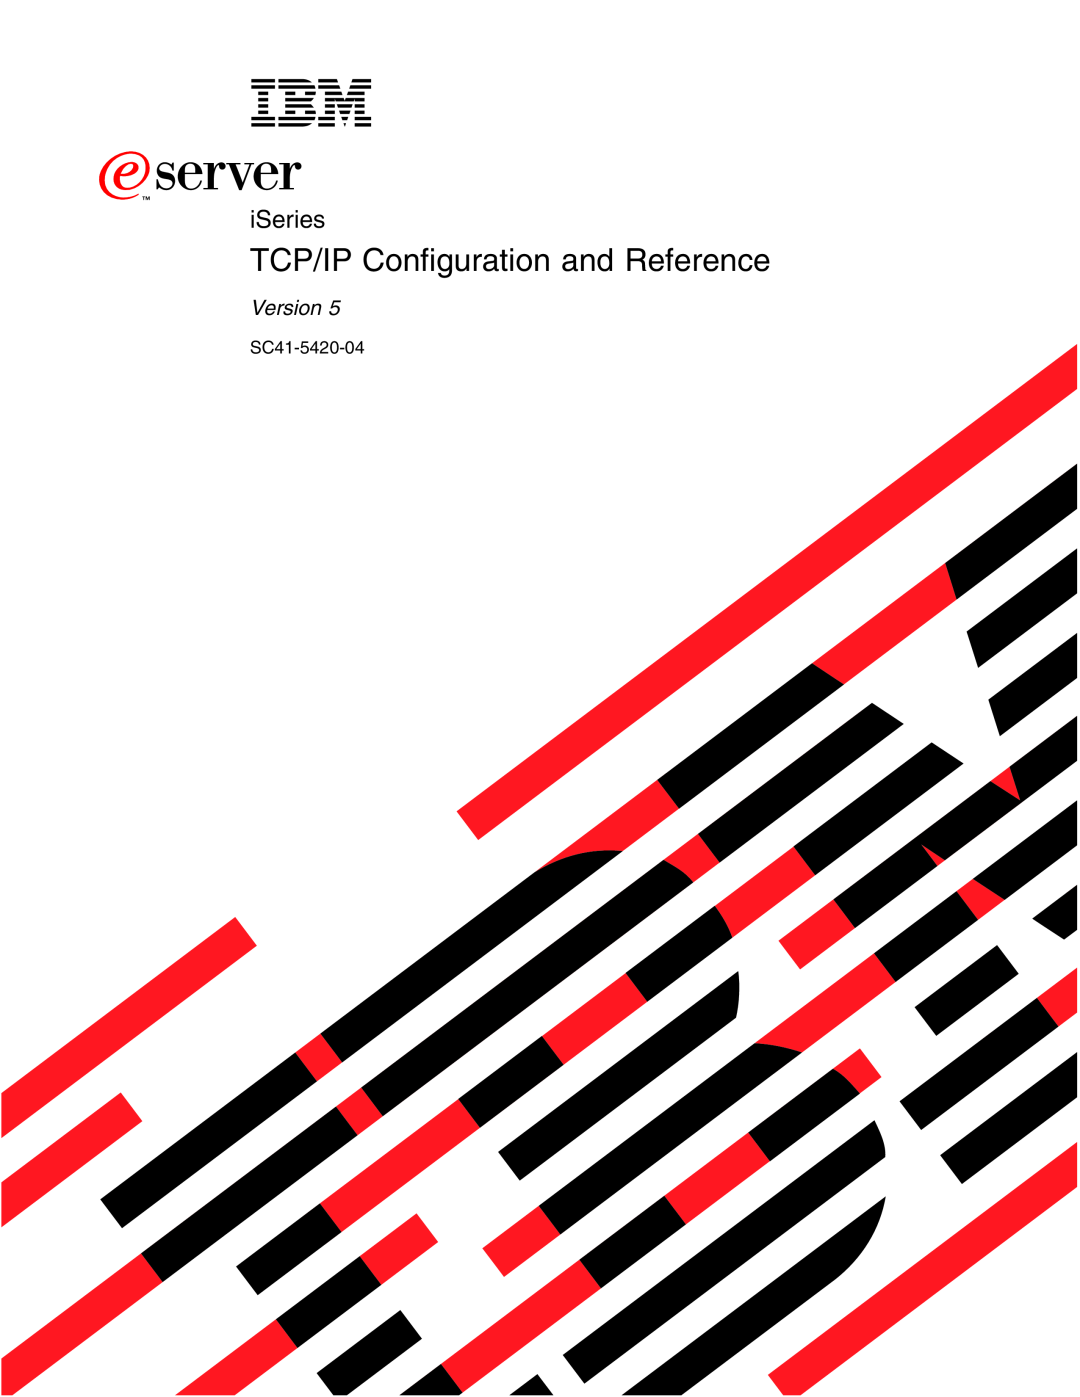 IBM SC41-5420-04 manual TCP/IP Configuration and Reference, iSeries, Version 